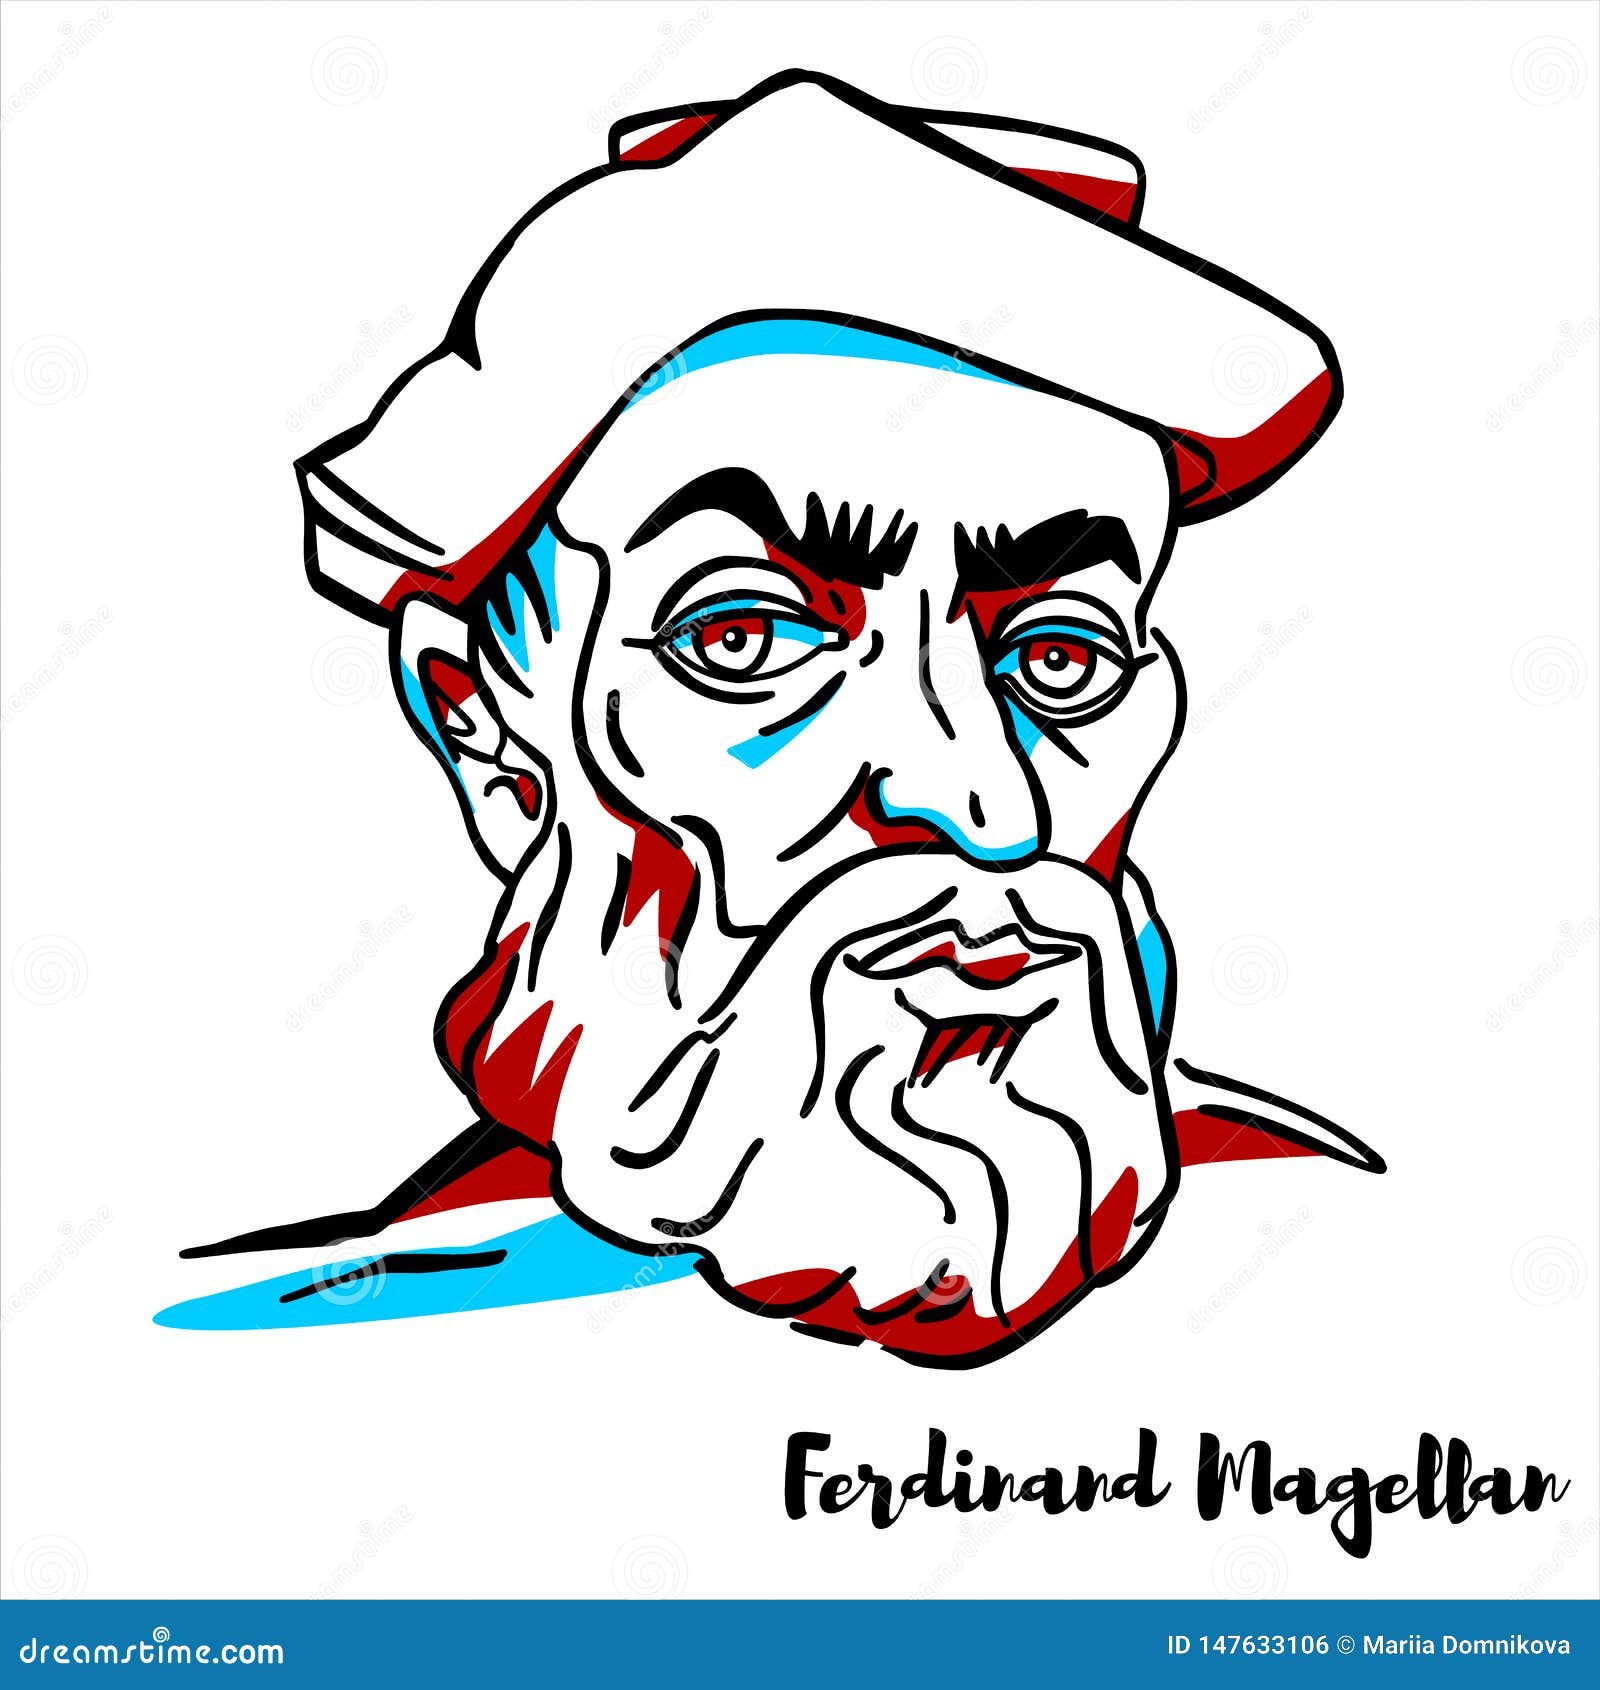 https://thumbs.dreamstime.com/z/ferdinand-magellan-portrait-engraved-vector-ink-contours-portuguese-explorer-who-organised-spanish-expedition-to-east-147633106.jpg